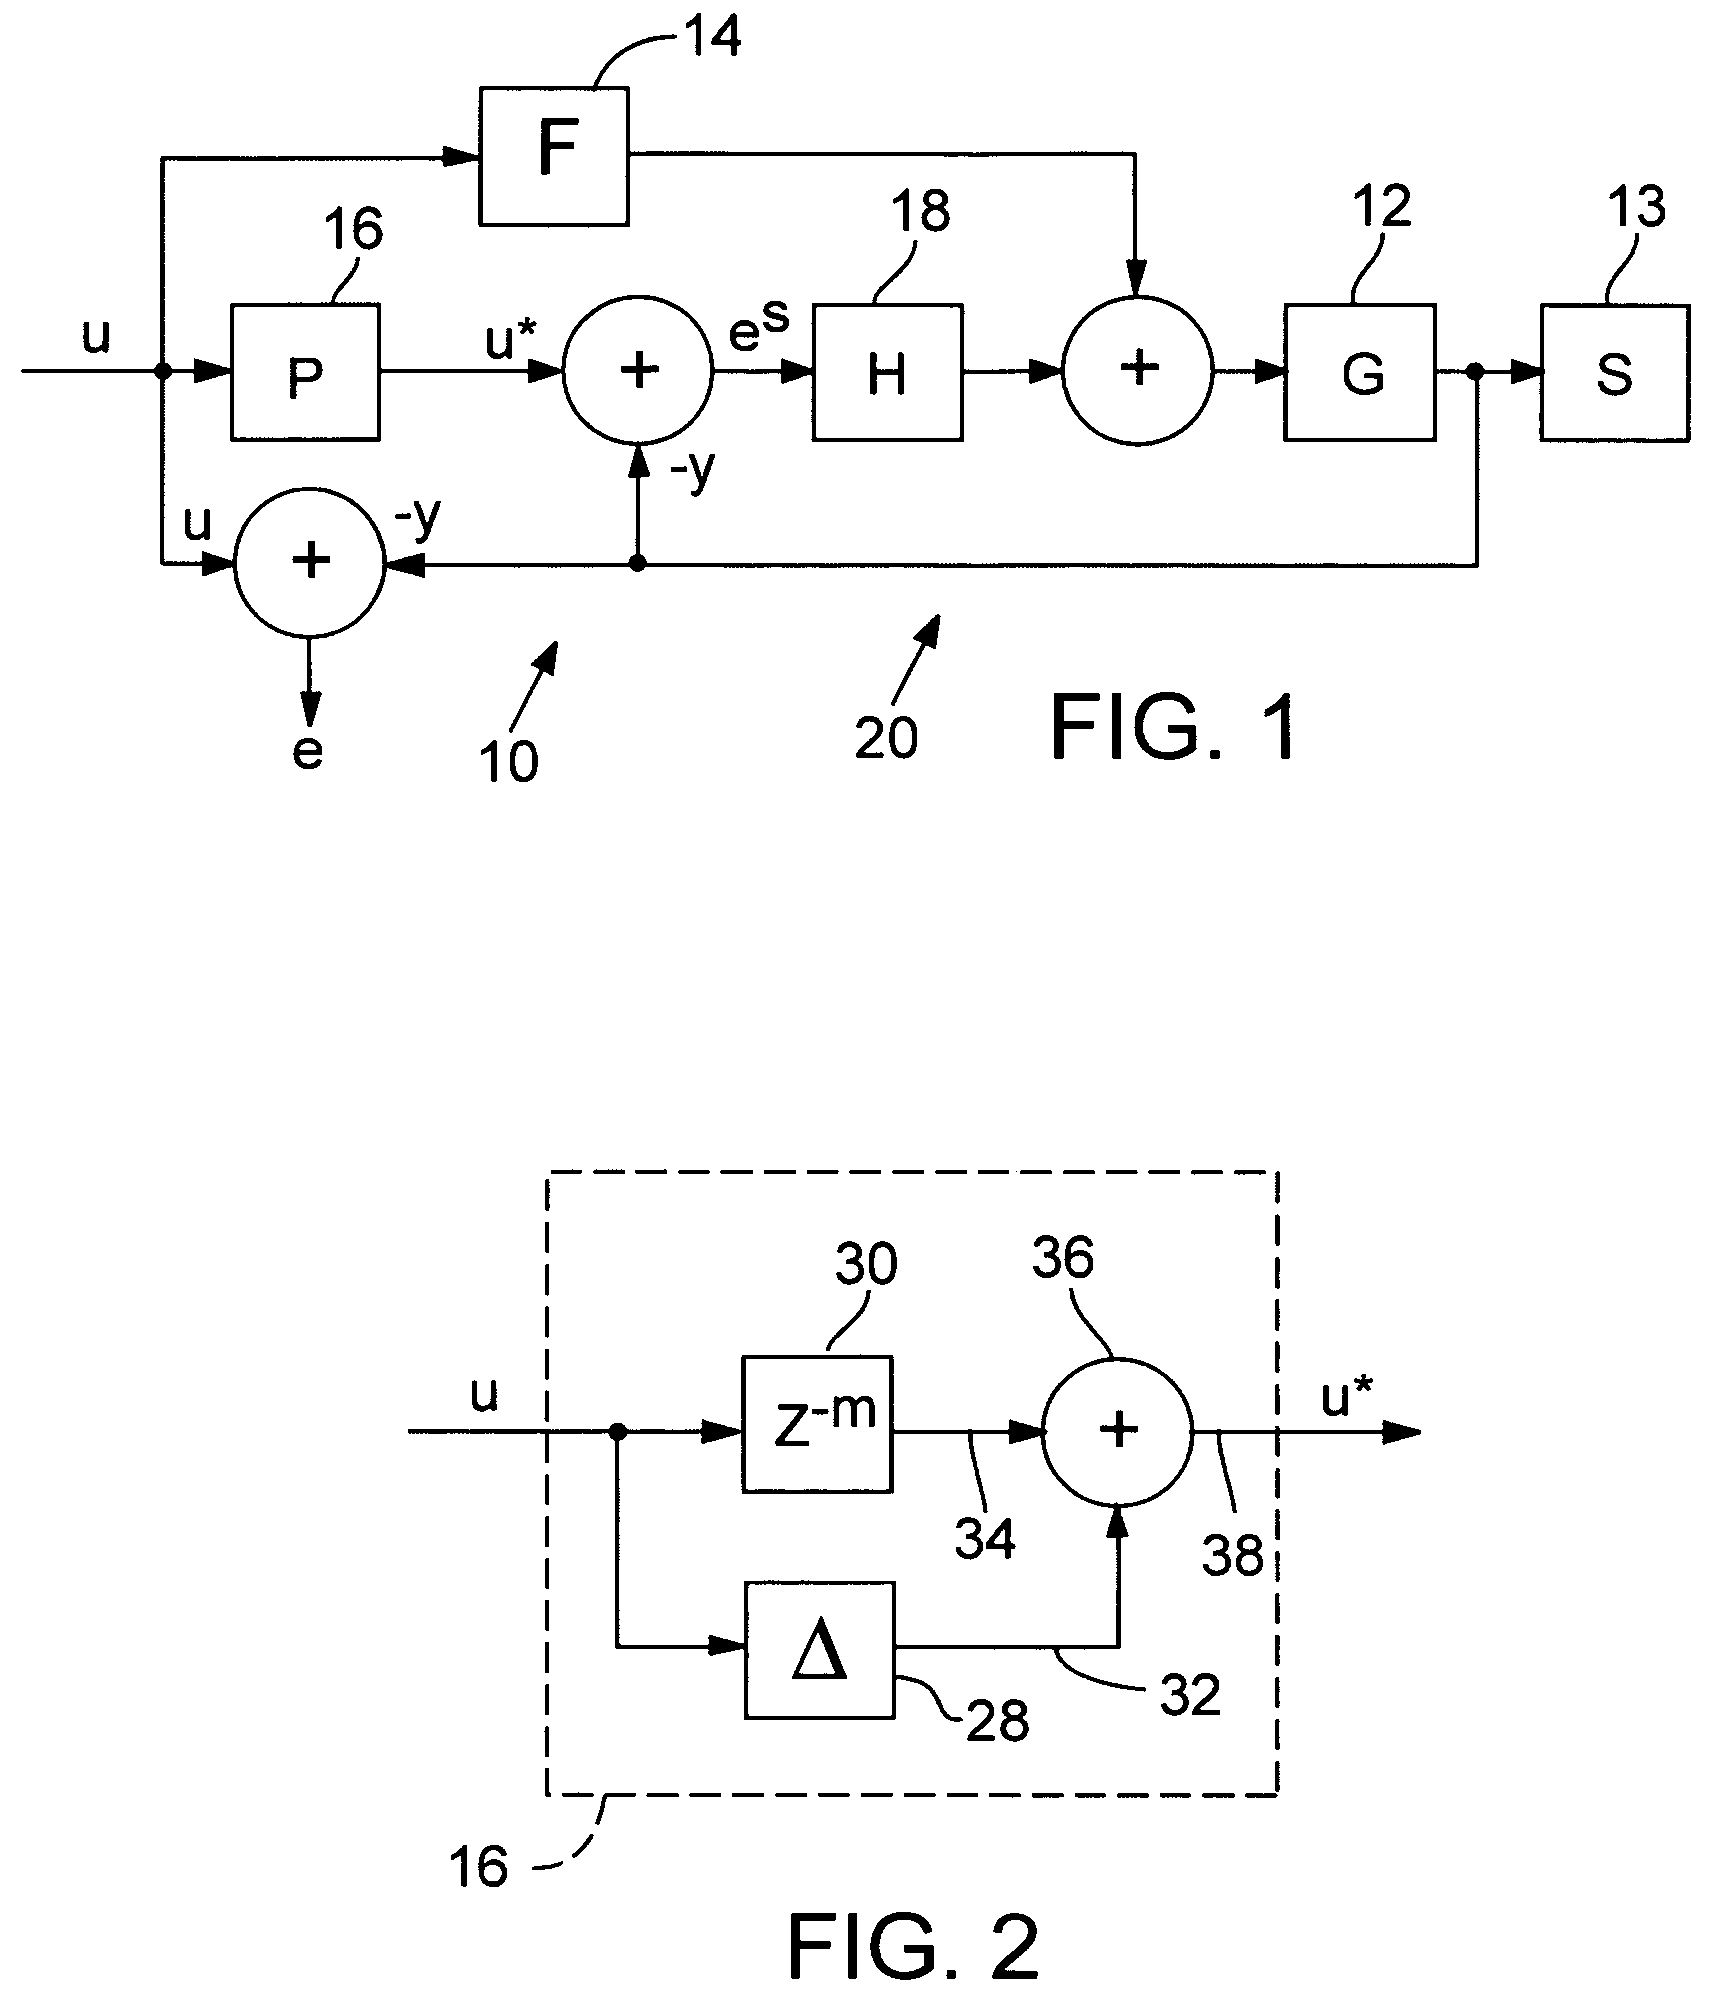 Adaptive command filtering for servomechanism control systems